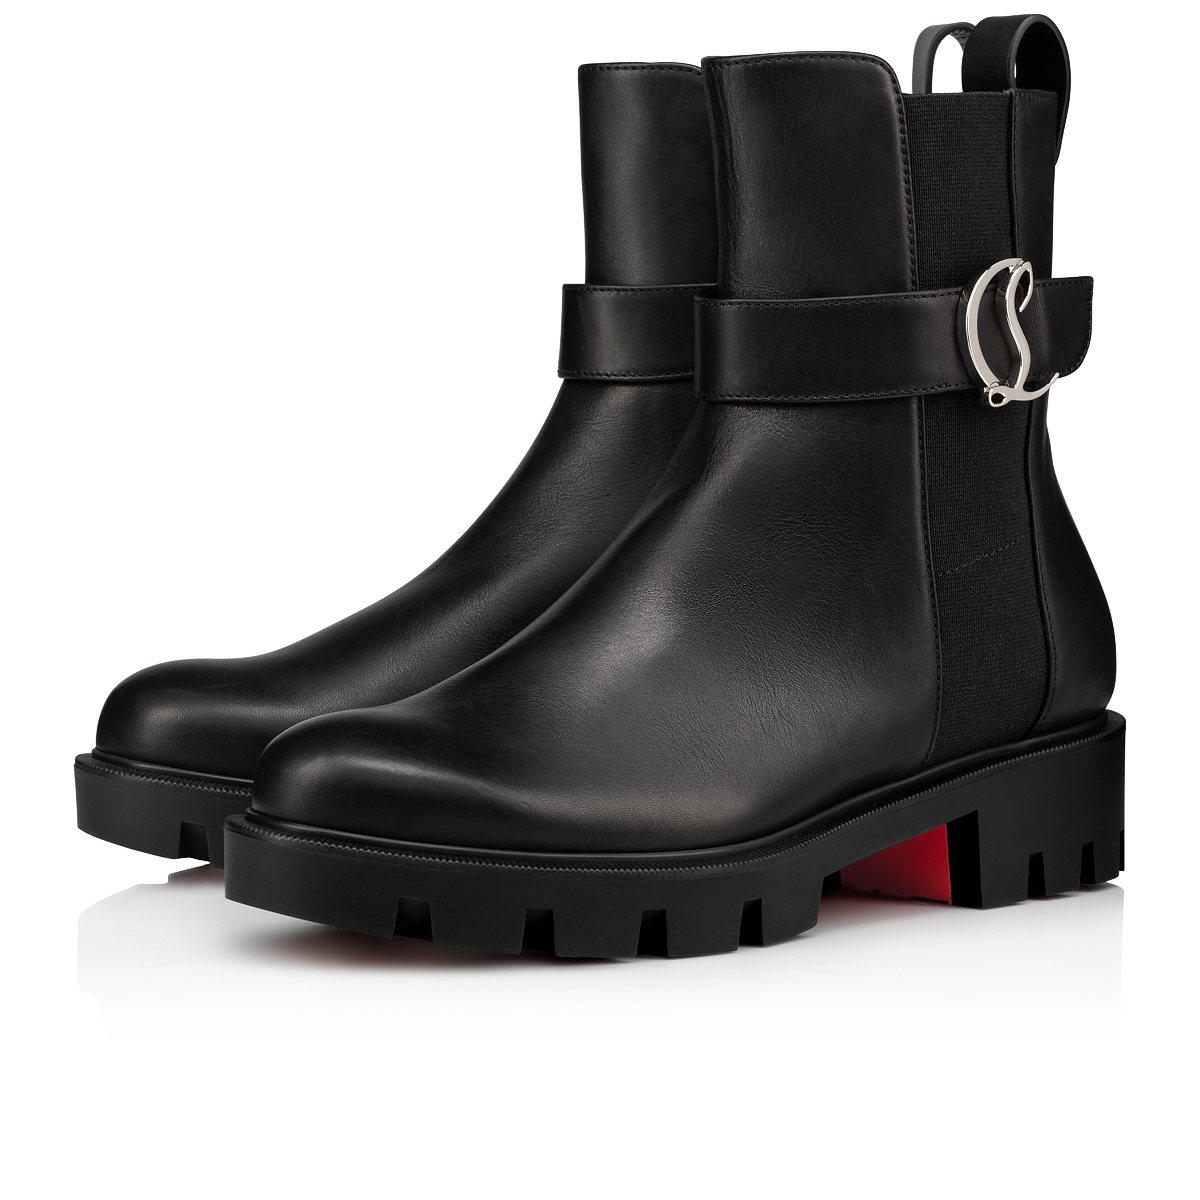 CL Chelsea Booty Leather Boots in Black - Christian Louboutin